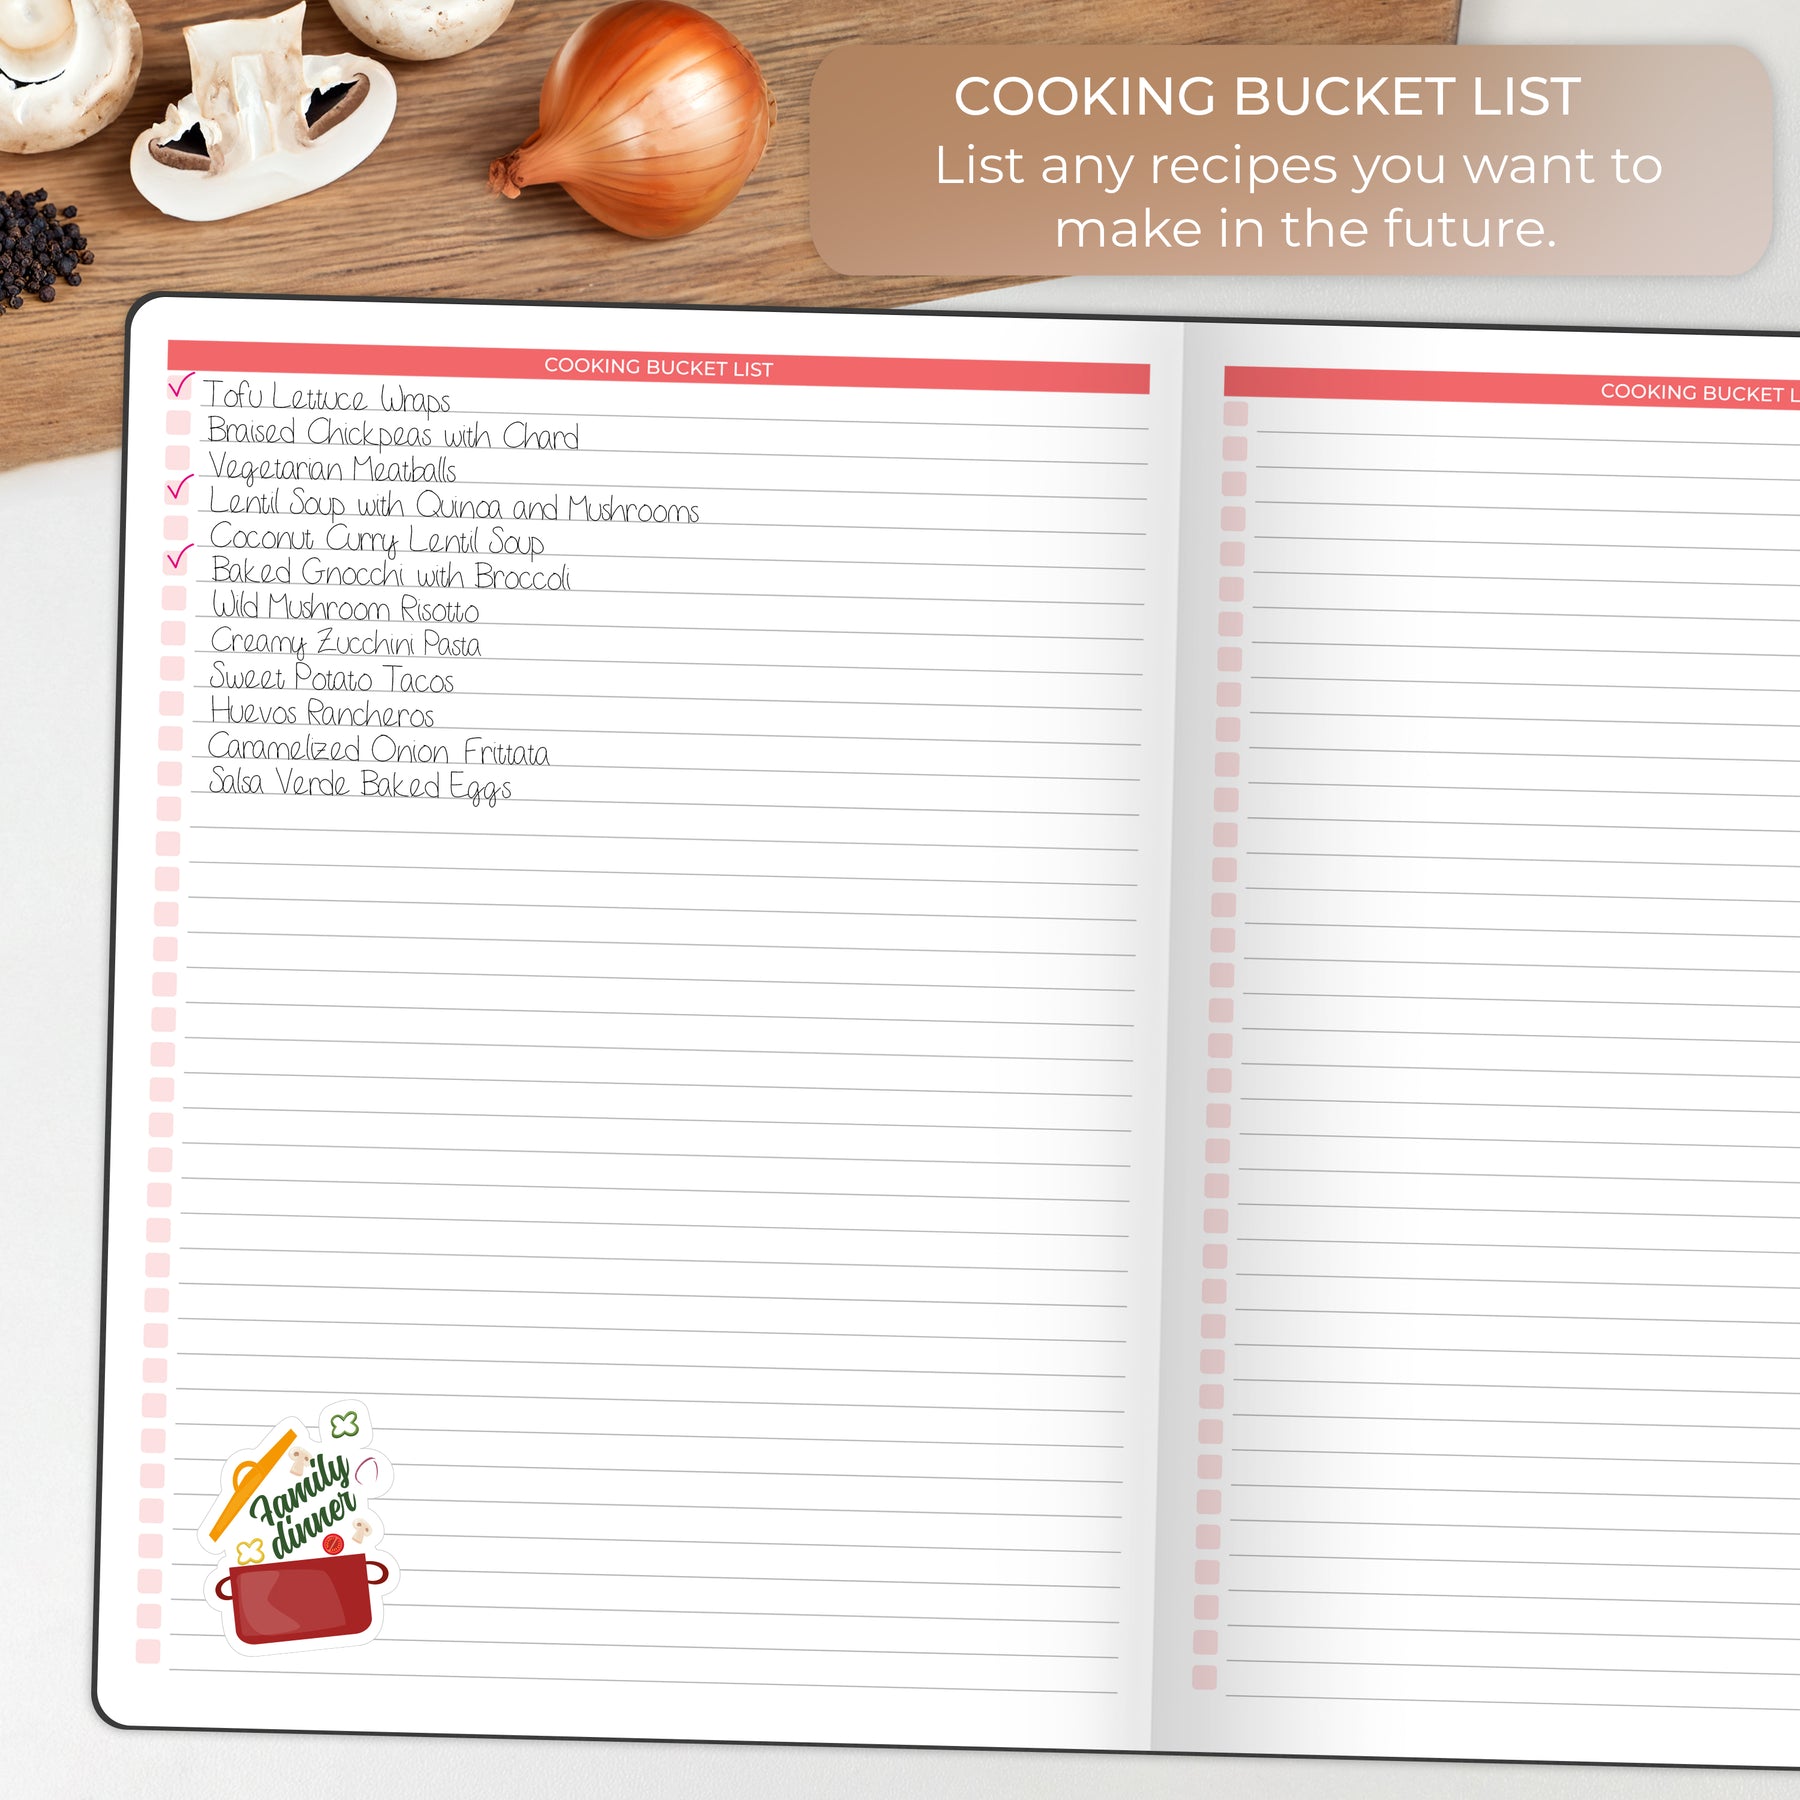  Clever Fox Recipe Book - Make Your Own Family Cookbook